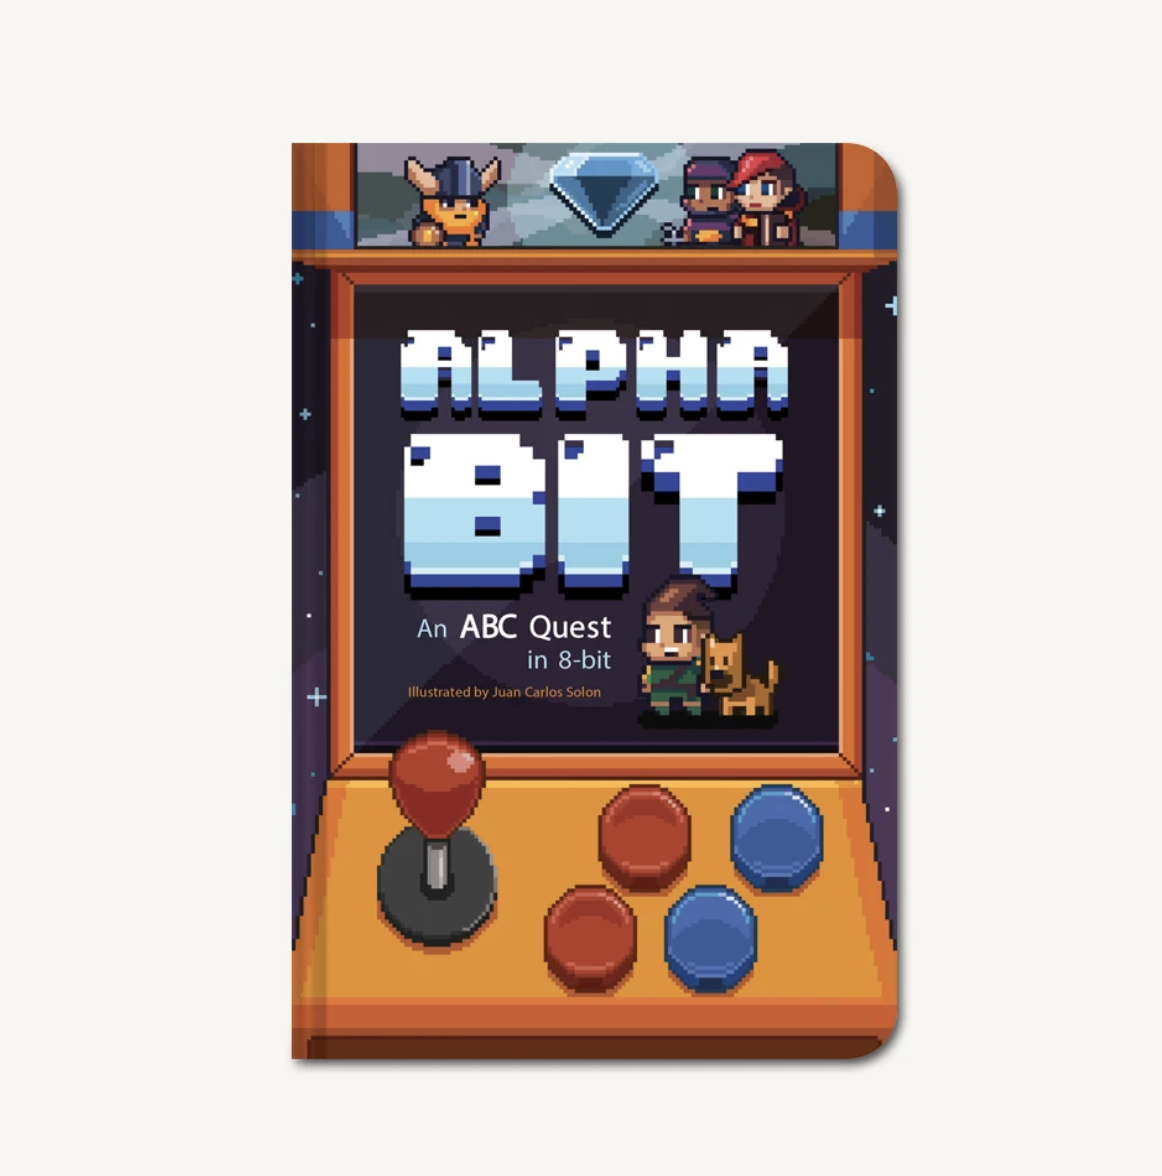 a board book designed to look like an old school arcade machine